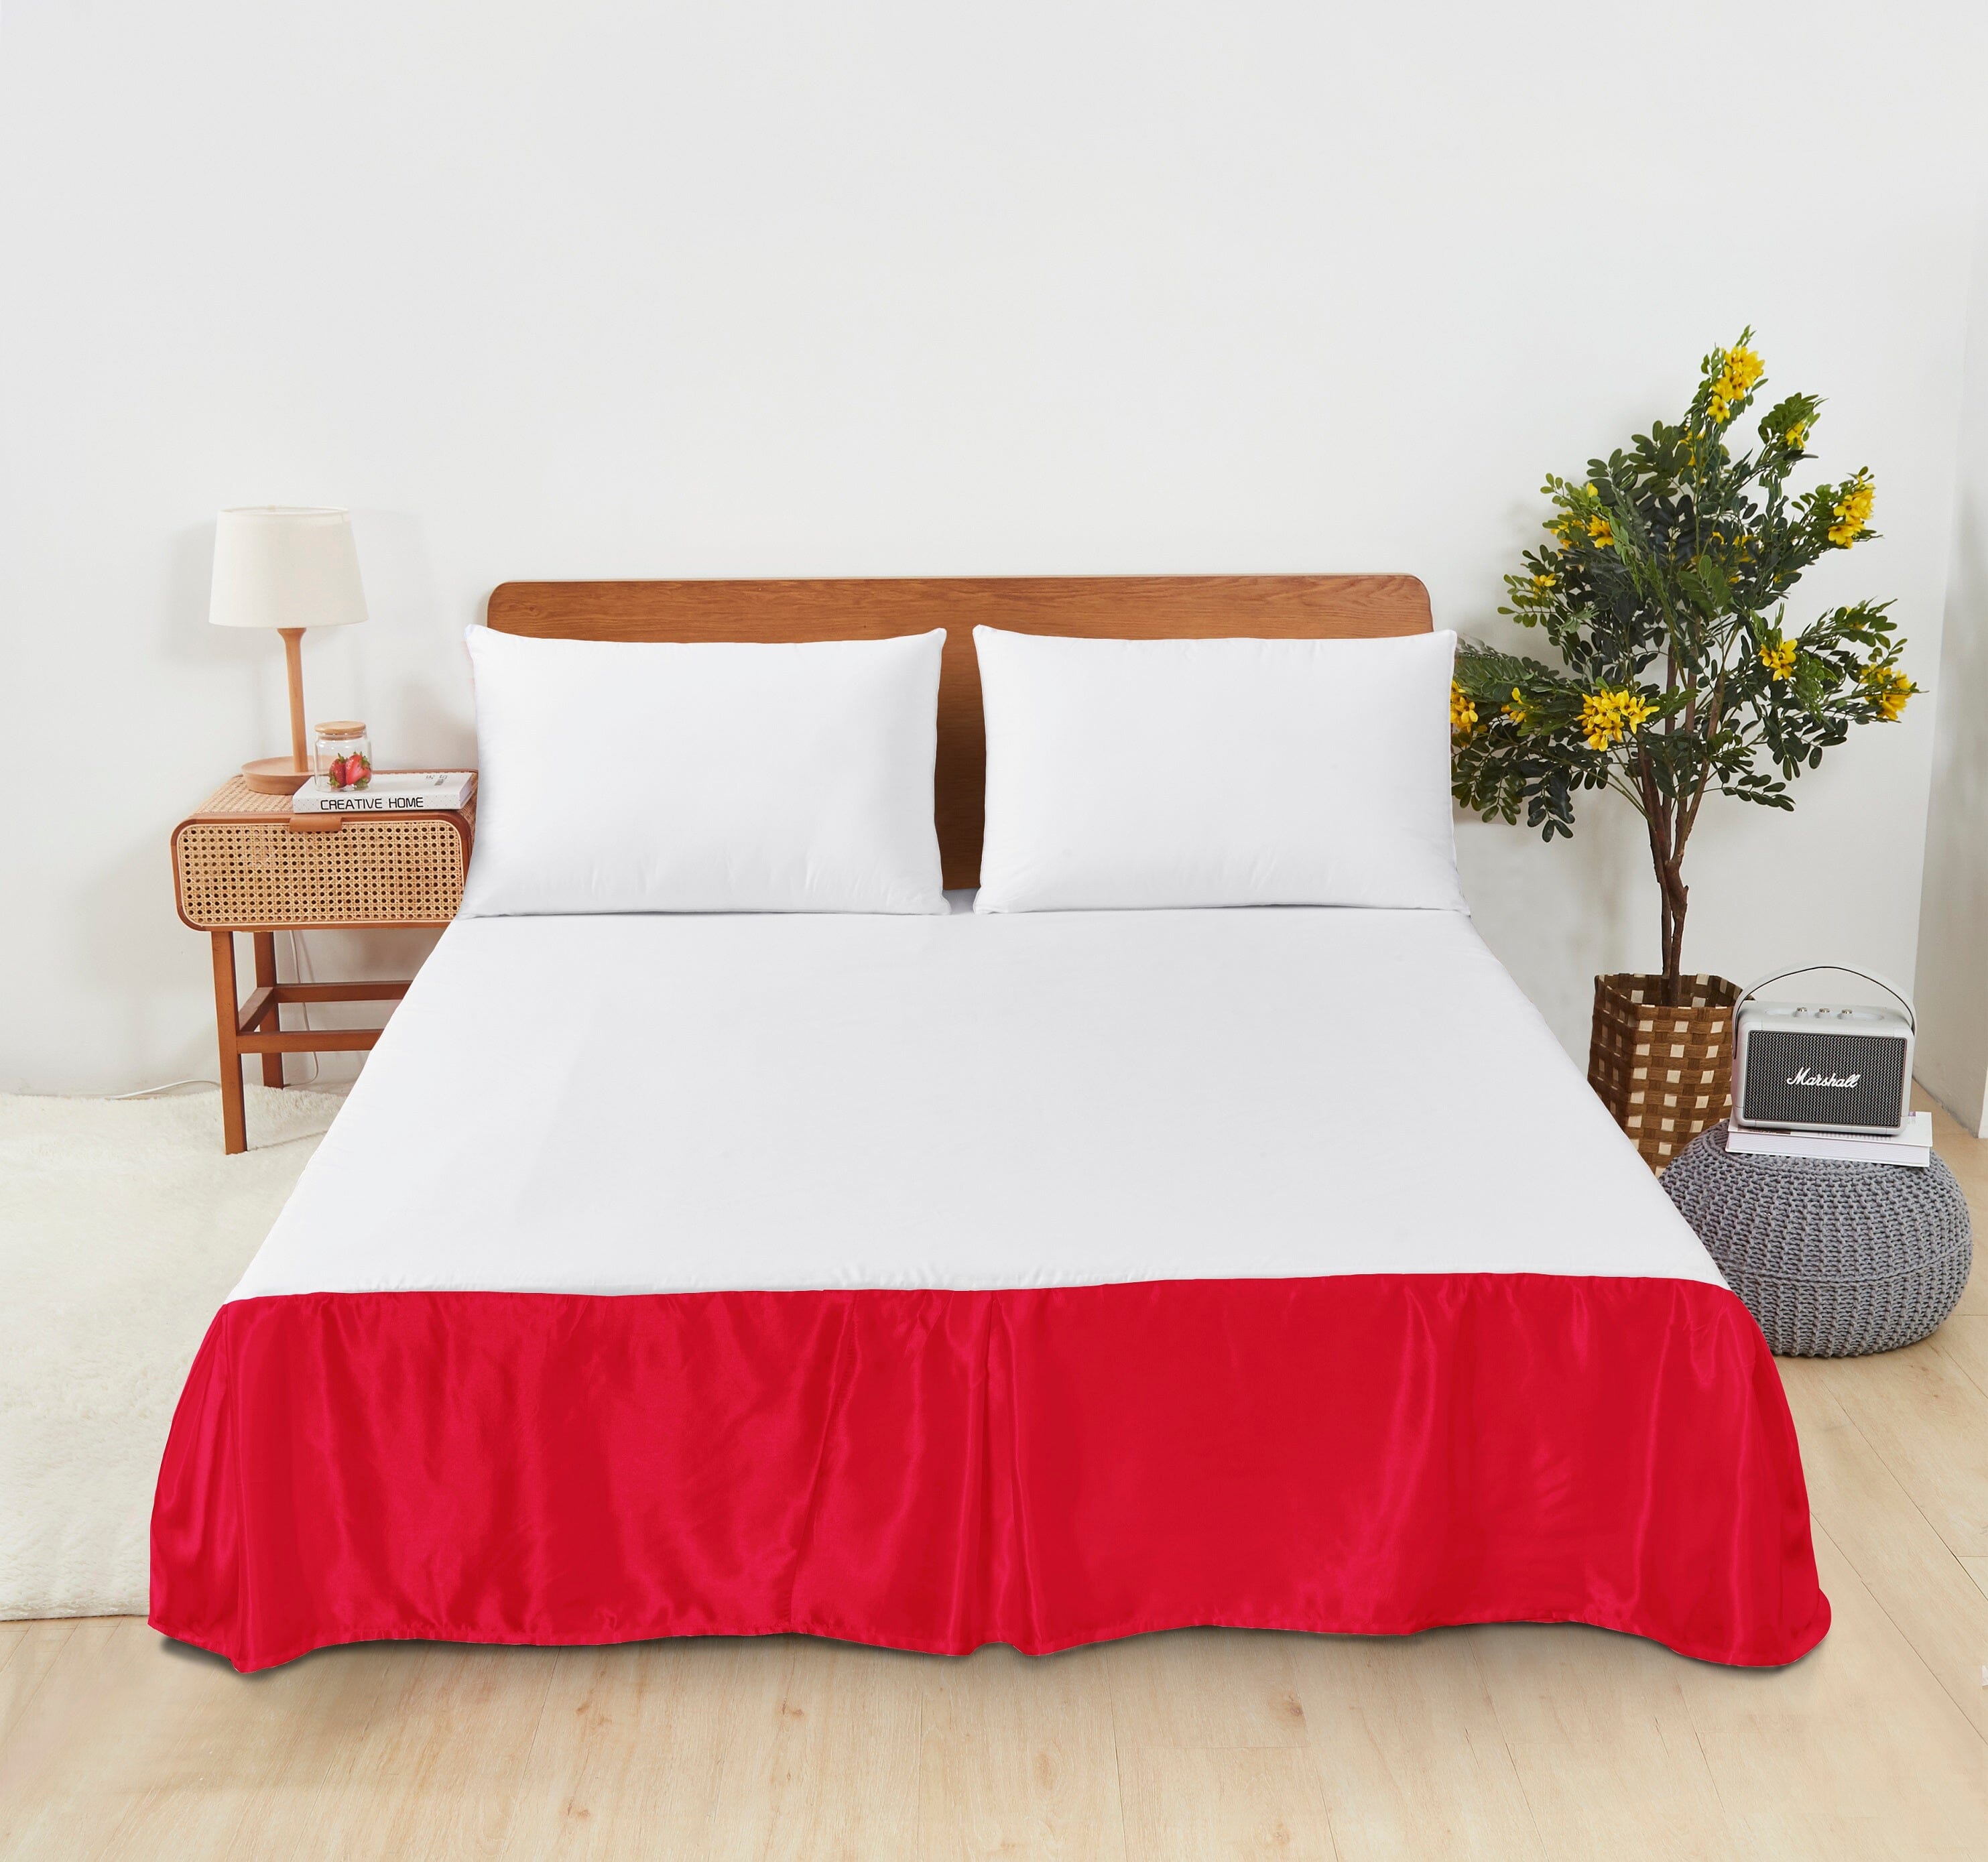 Tache Satin Romantic Bright Red Glam Platform Tailored 14" Bed Skirt Dust Ruffle (HY4174) - Tache Home Fashion